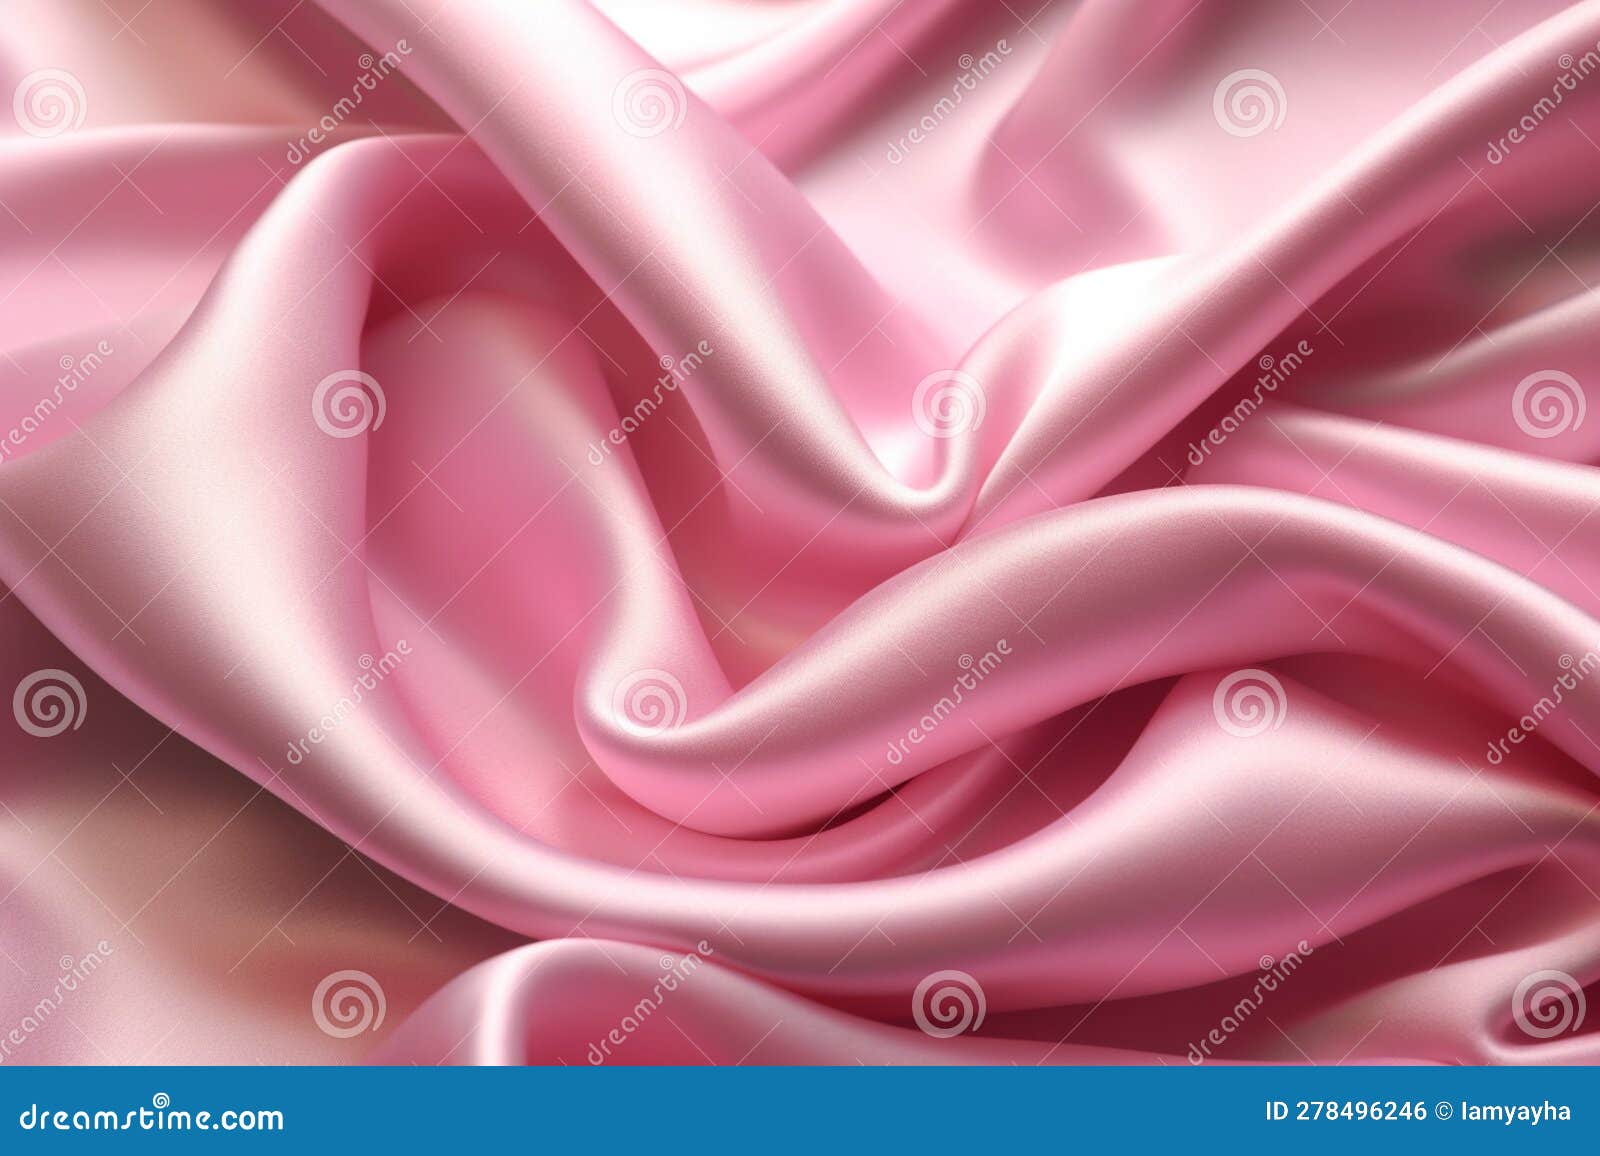 Free Vector  Pink silk folded fabric background luxurious cloth